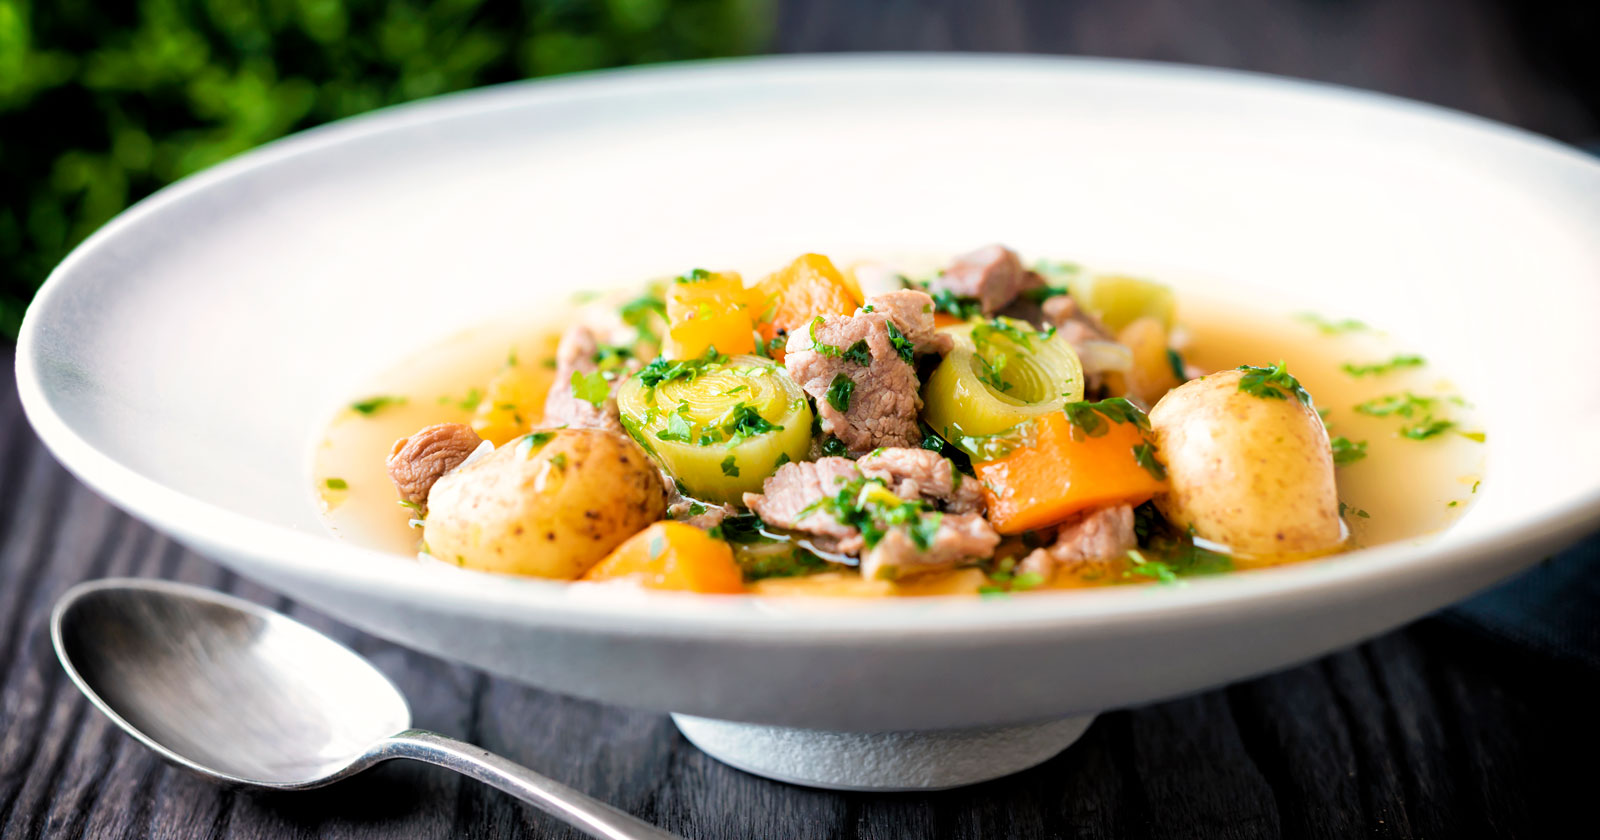 Welsh cawl, lamb and vegetable broth based soup with potatoes, leek, carrot and swede.